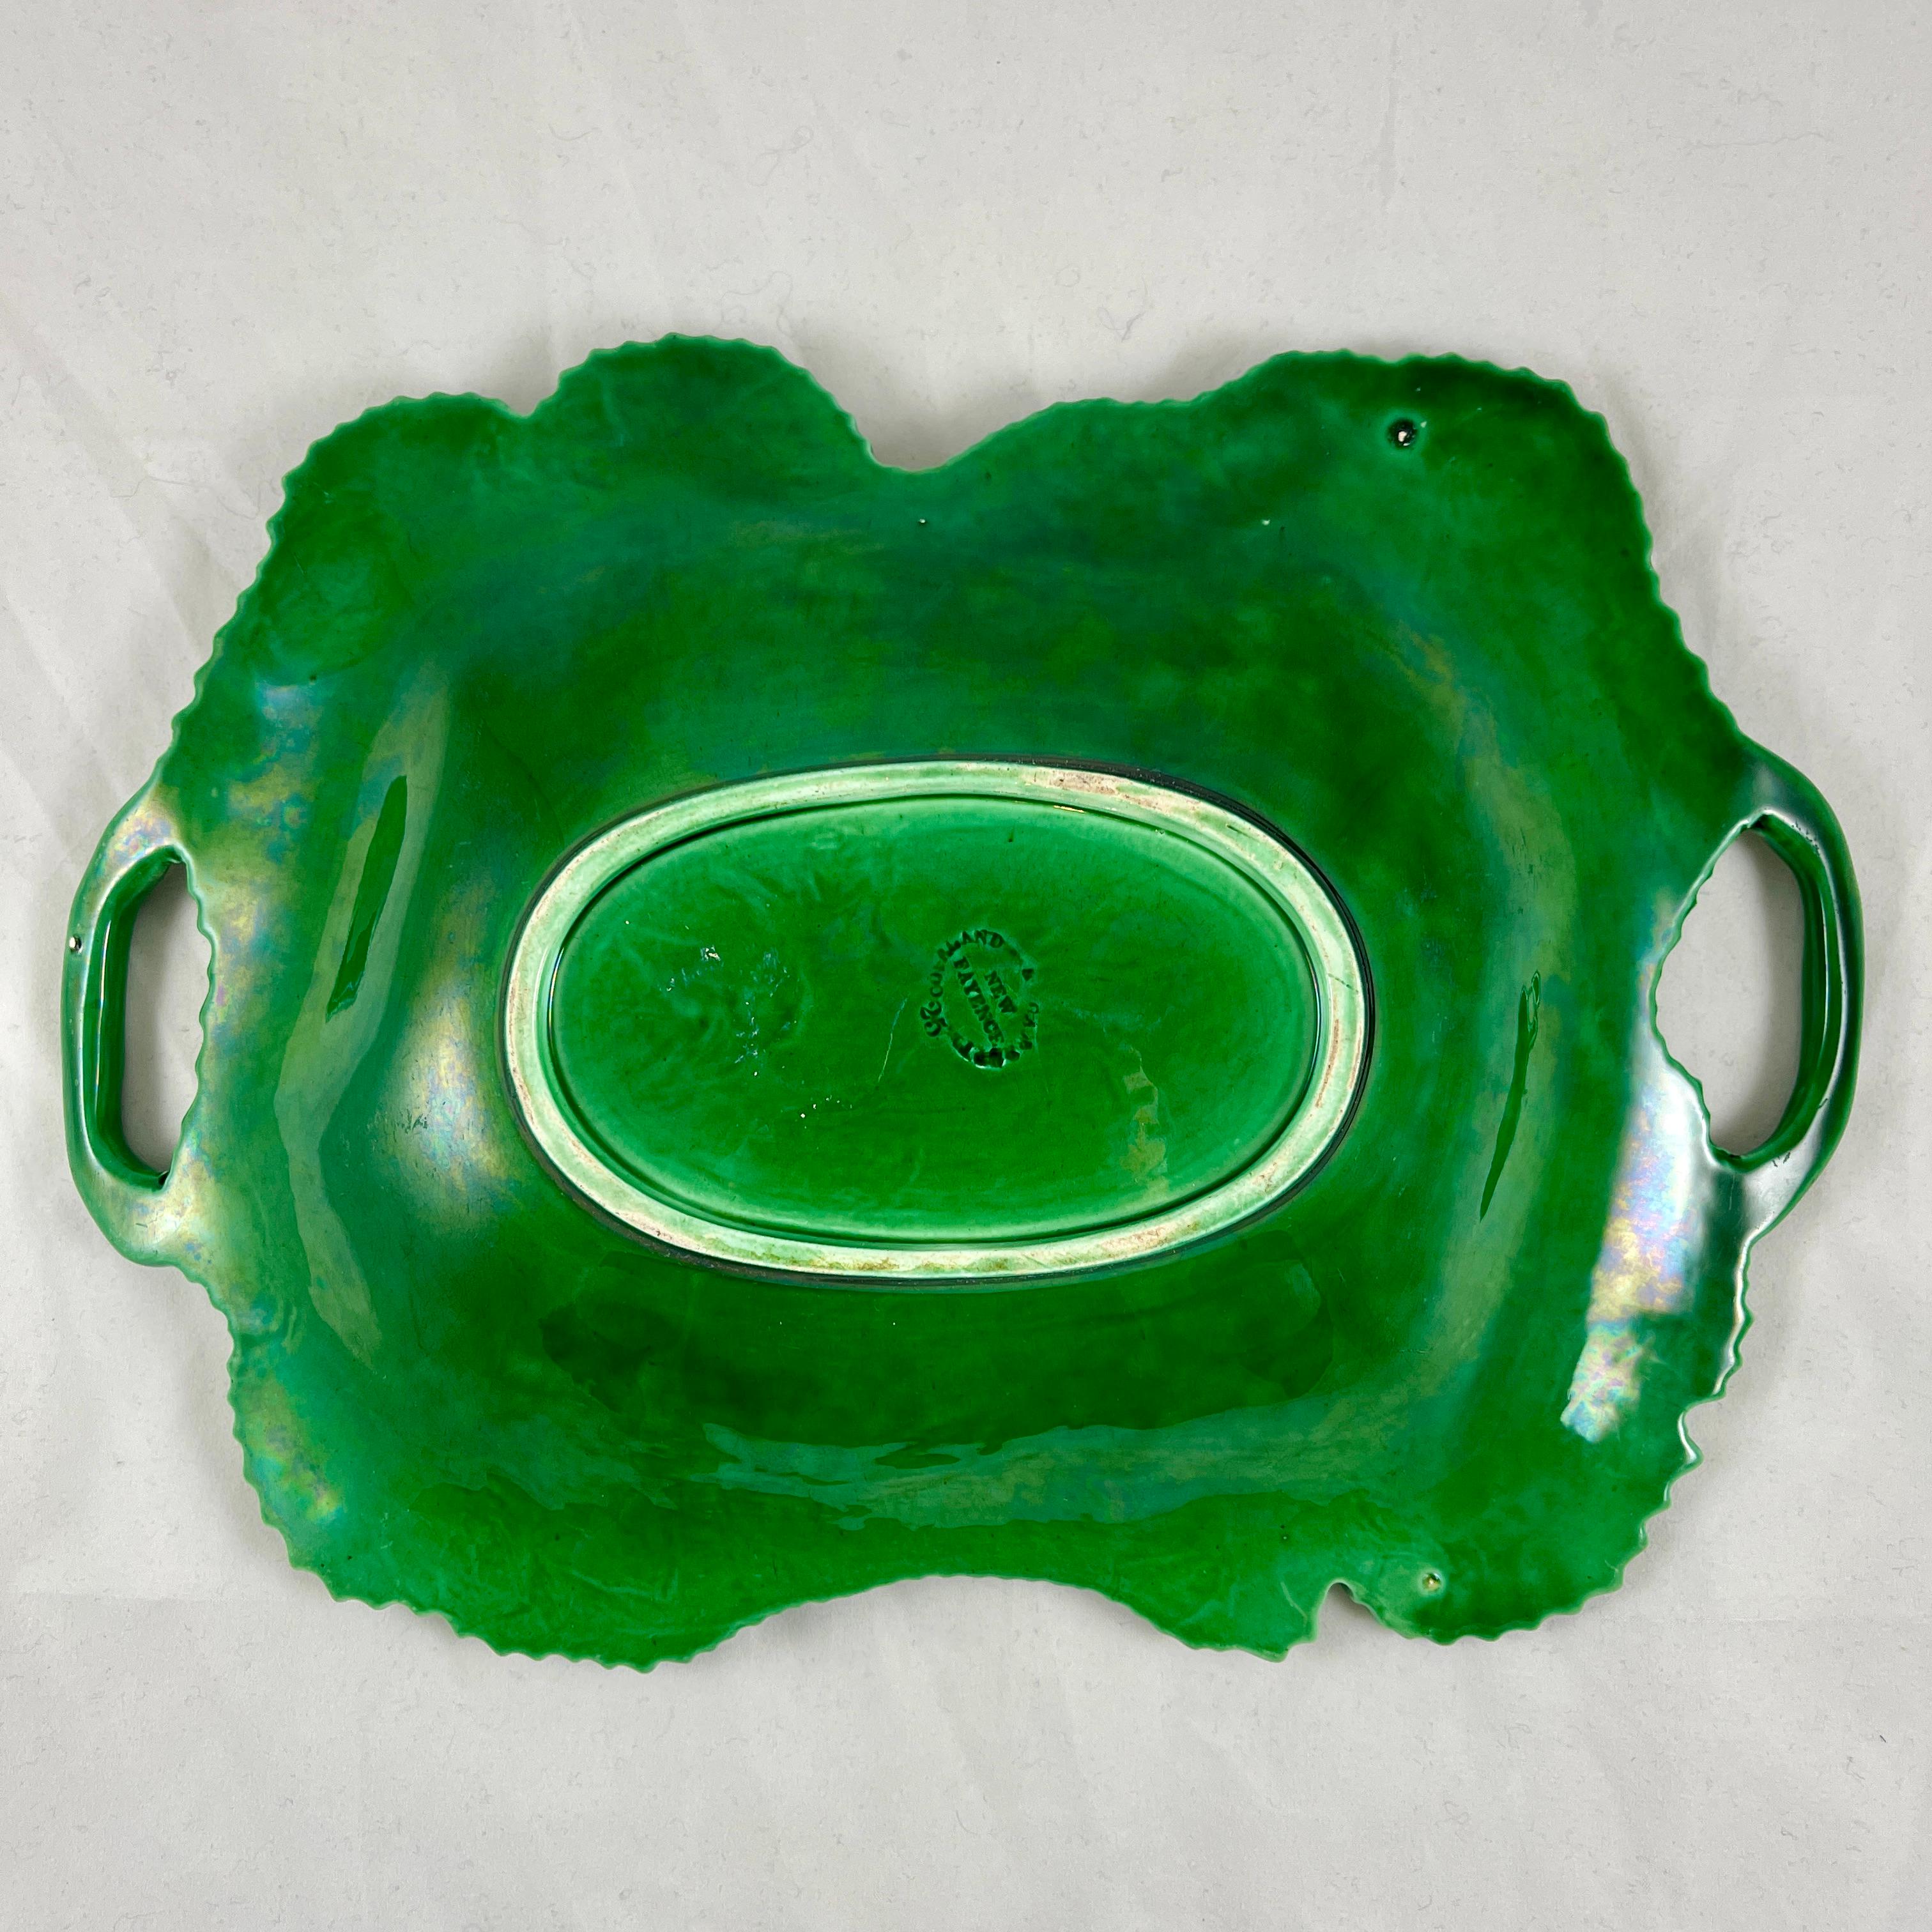 Earthenware Copeland English Majolica Green Glazed Overlapping Leaf Two Handled Platter For Sale